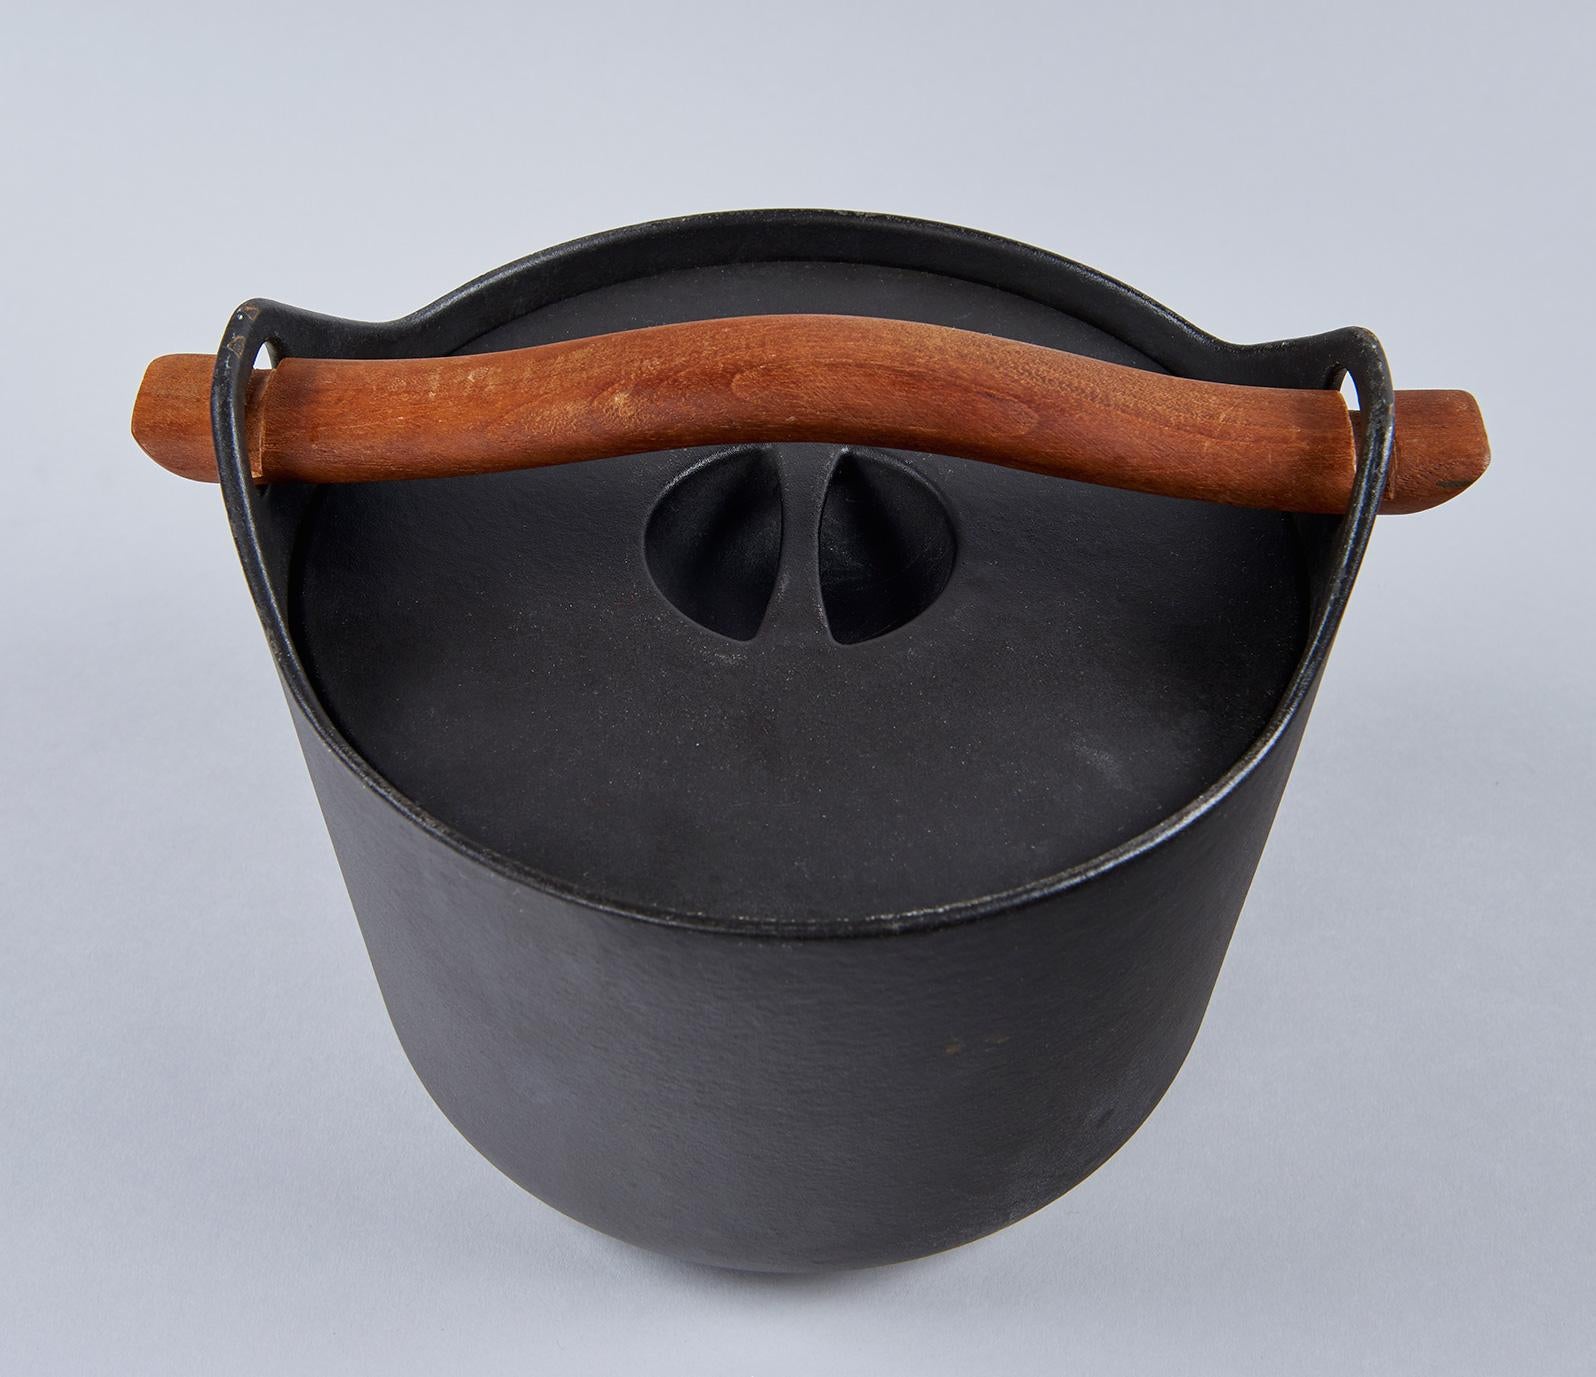 Sarpaneva's famous cast iron cooking pot, made by Rosenlew & Co. in Finland, won a silver medal at the 1961 Milan Triennale for its designer, the first of many international honors awarded to this humble but exquisitely designed object. This is a